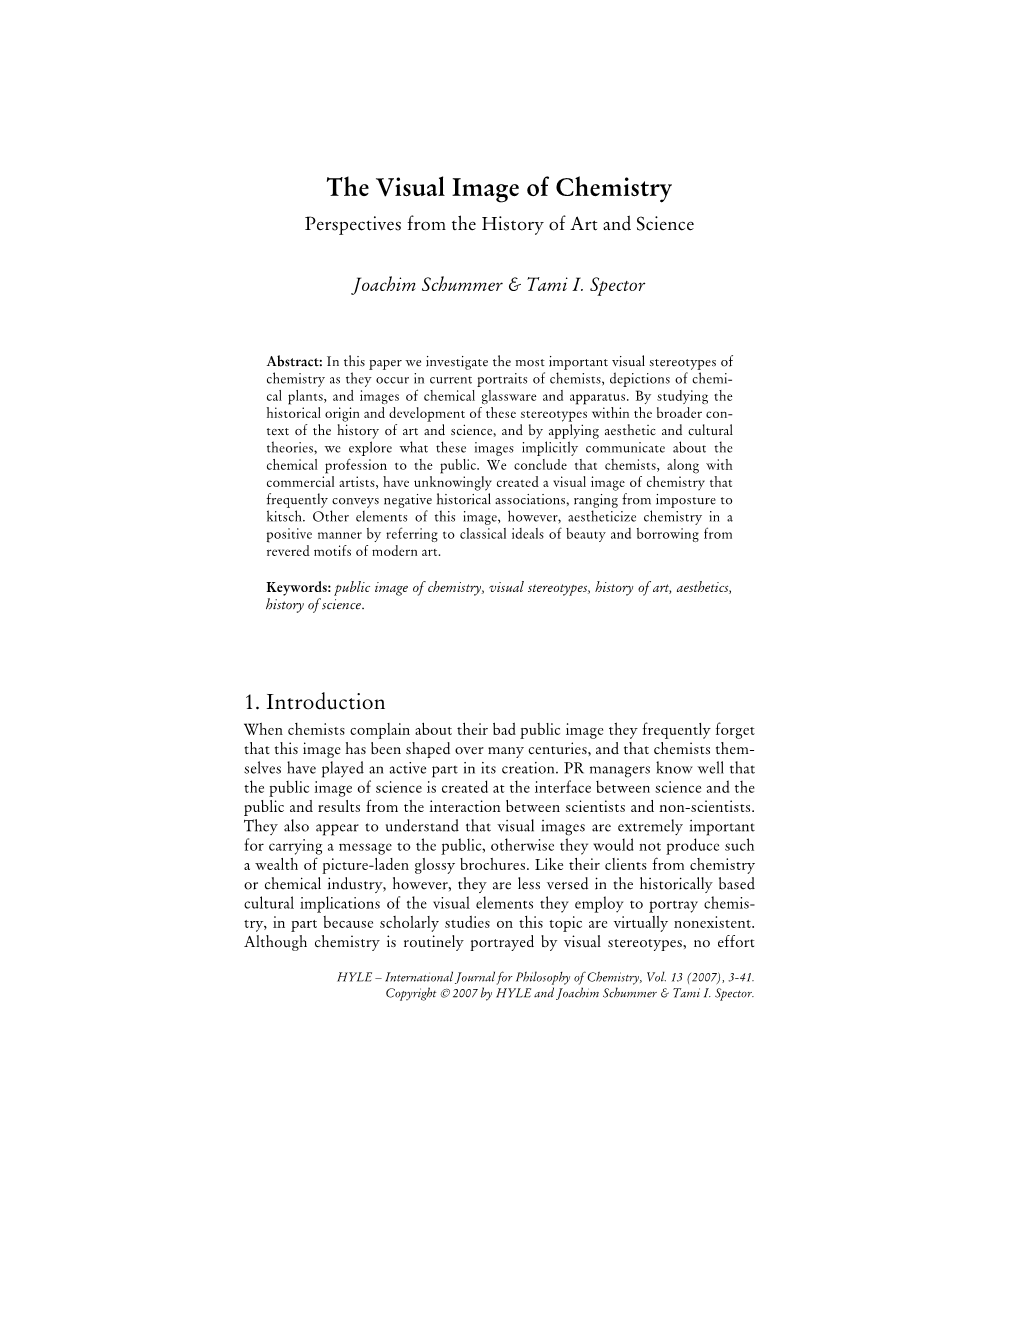 The Visual Image of Chemistry: Perspectives from the History of Art